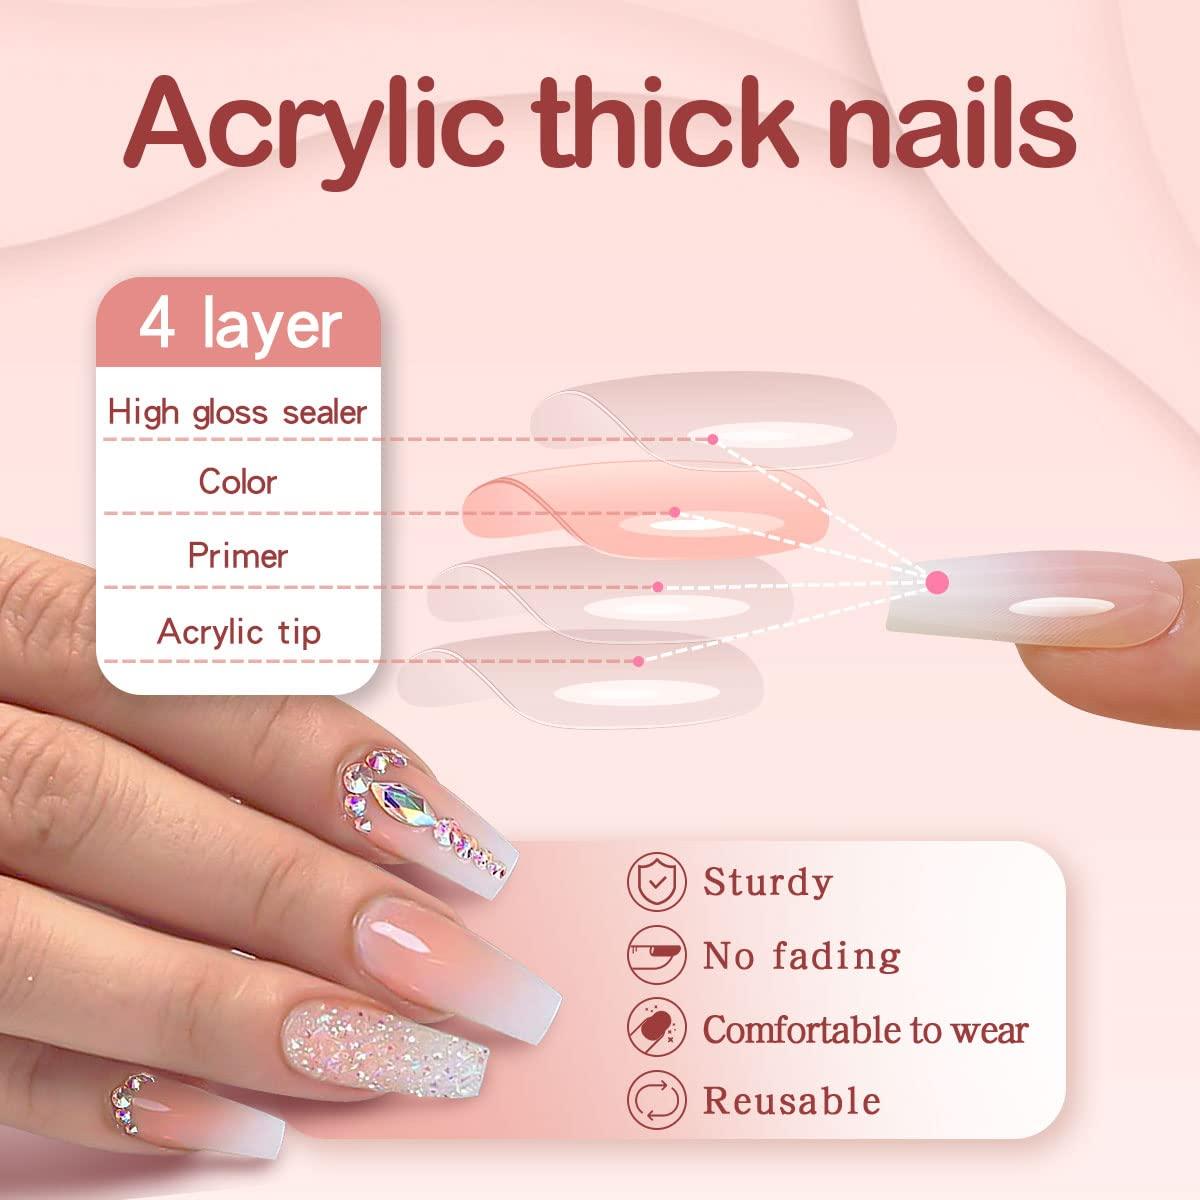 Pink French Tip Nails, Luxury Press On Nails, Stars and Gems Nails, Spring  Nails